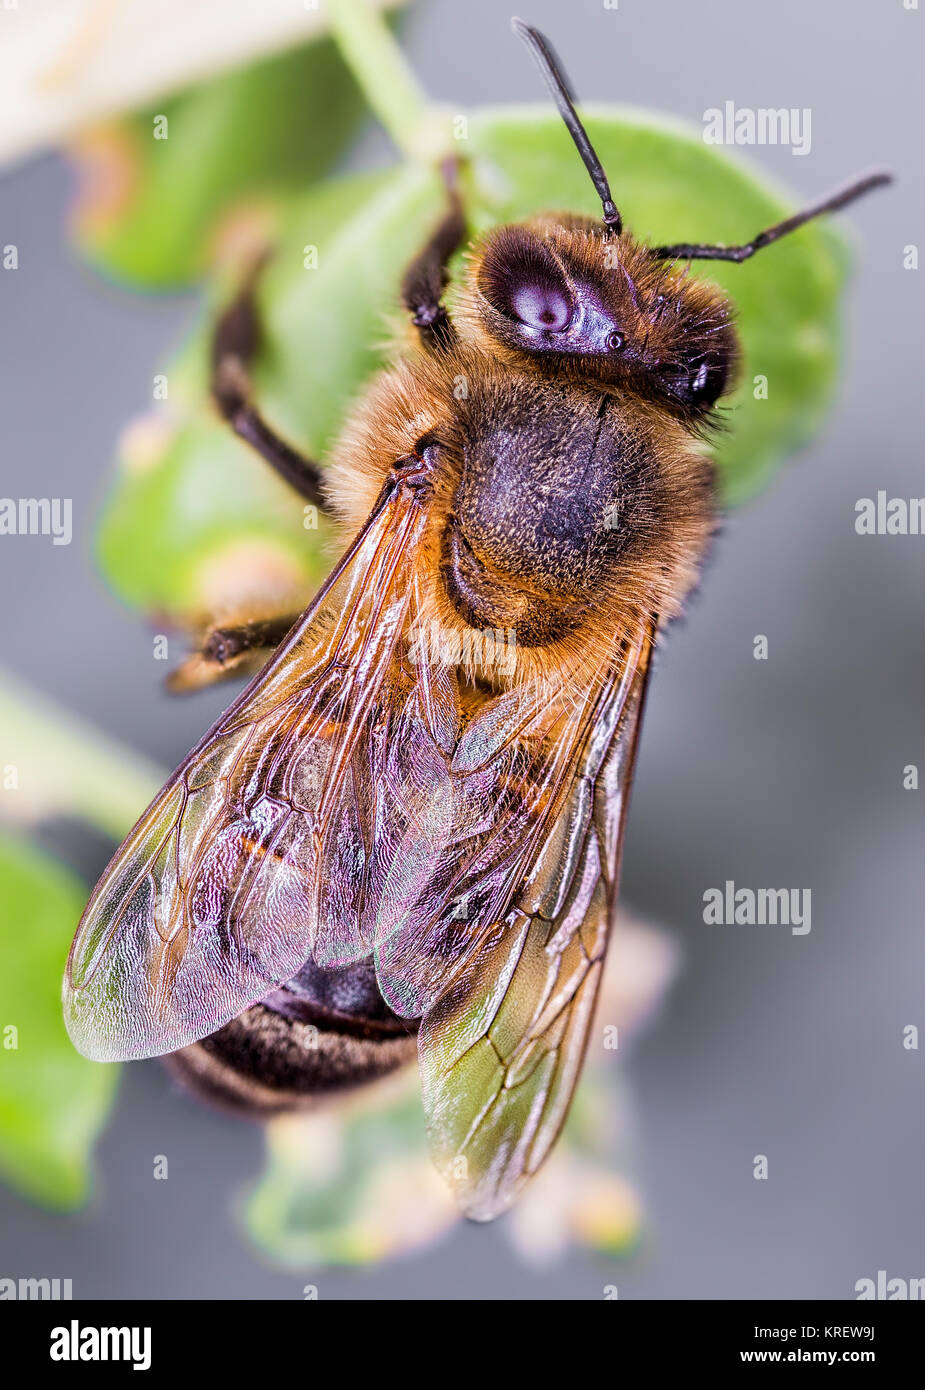 Abeja Obrera High Resolution Stock Photography and Images - Alamy